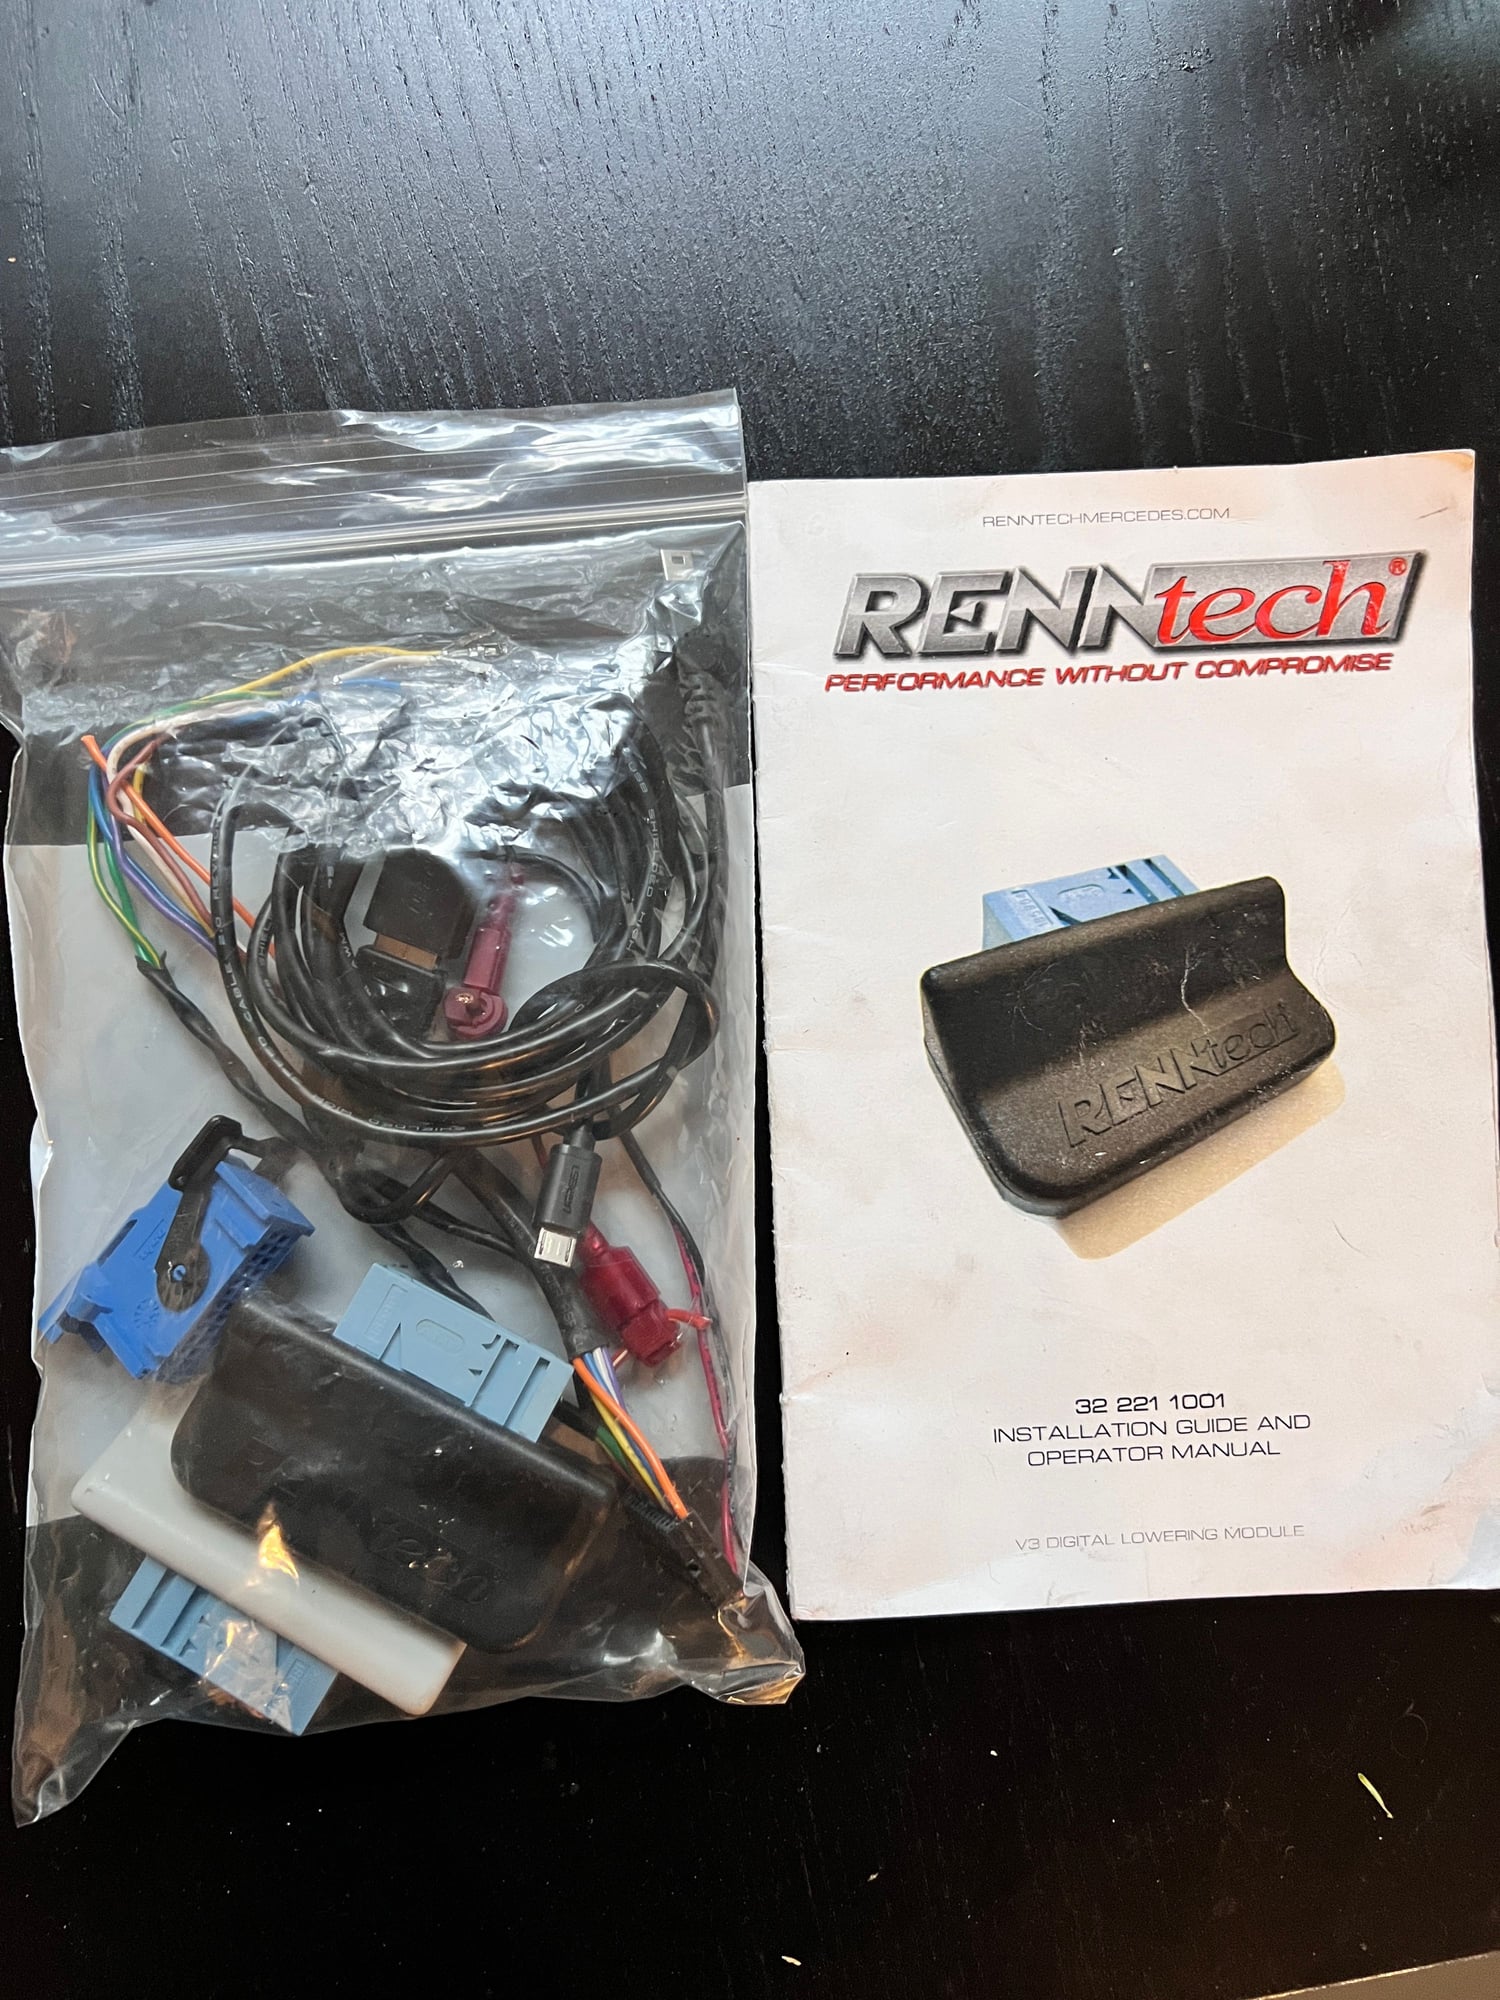 Steering/Suspension - RennTech DLM Digital Lowering Module V3 - Used - 2001 to 2022 Mercedes-Benz All Models - Austin, TX 78746, United States